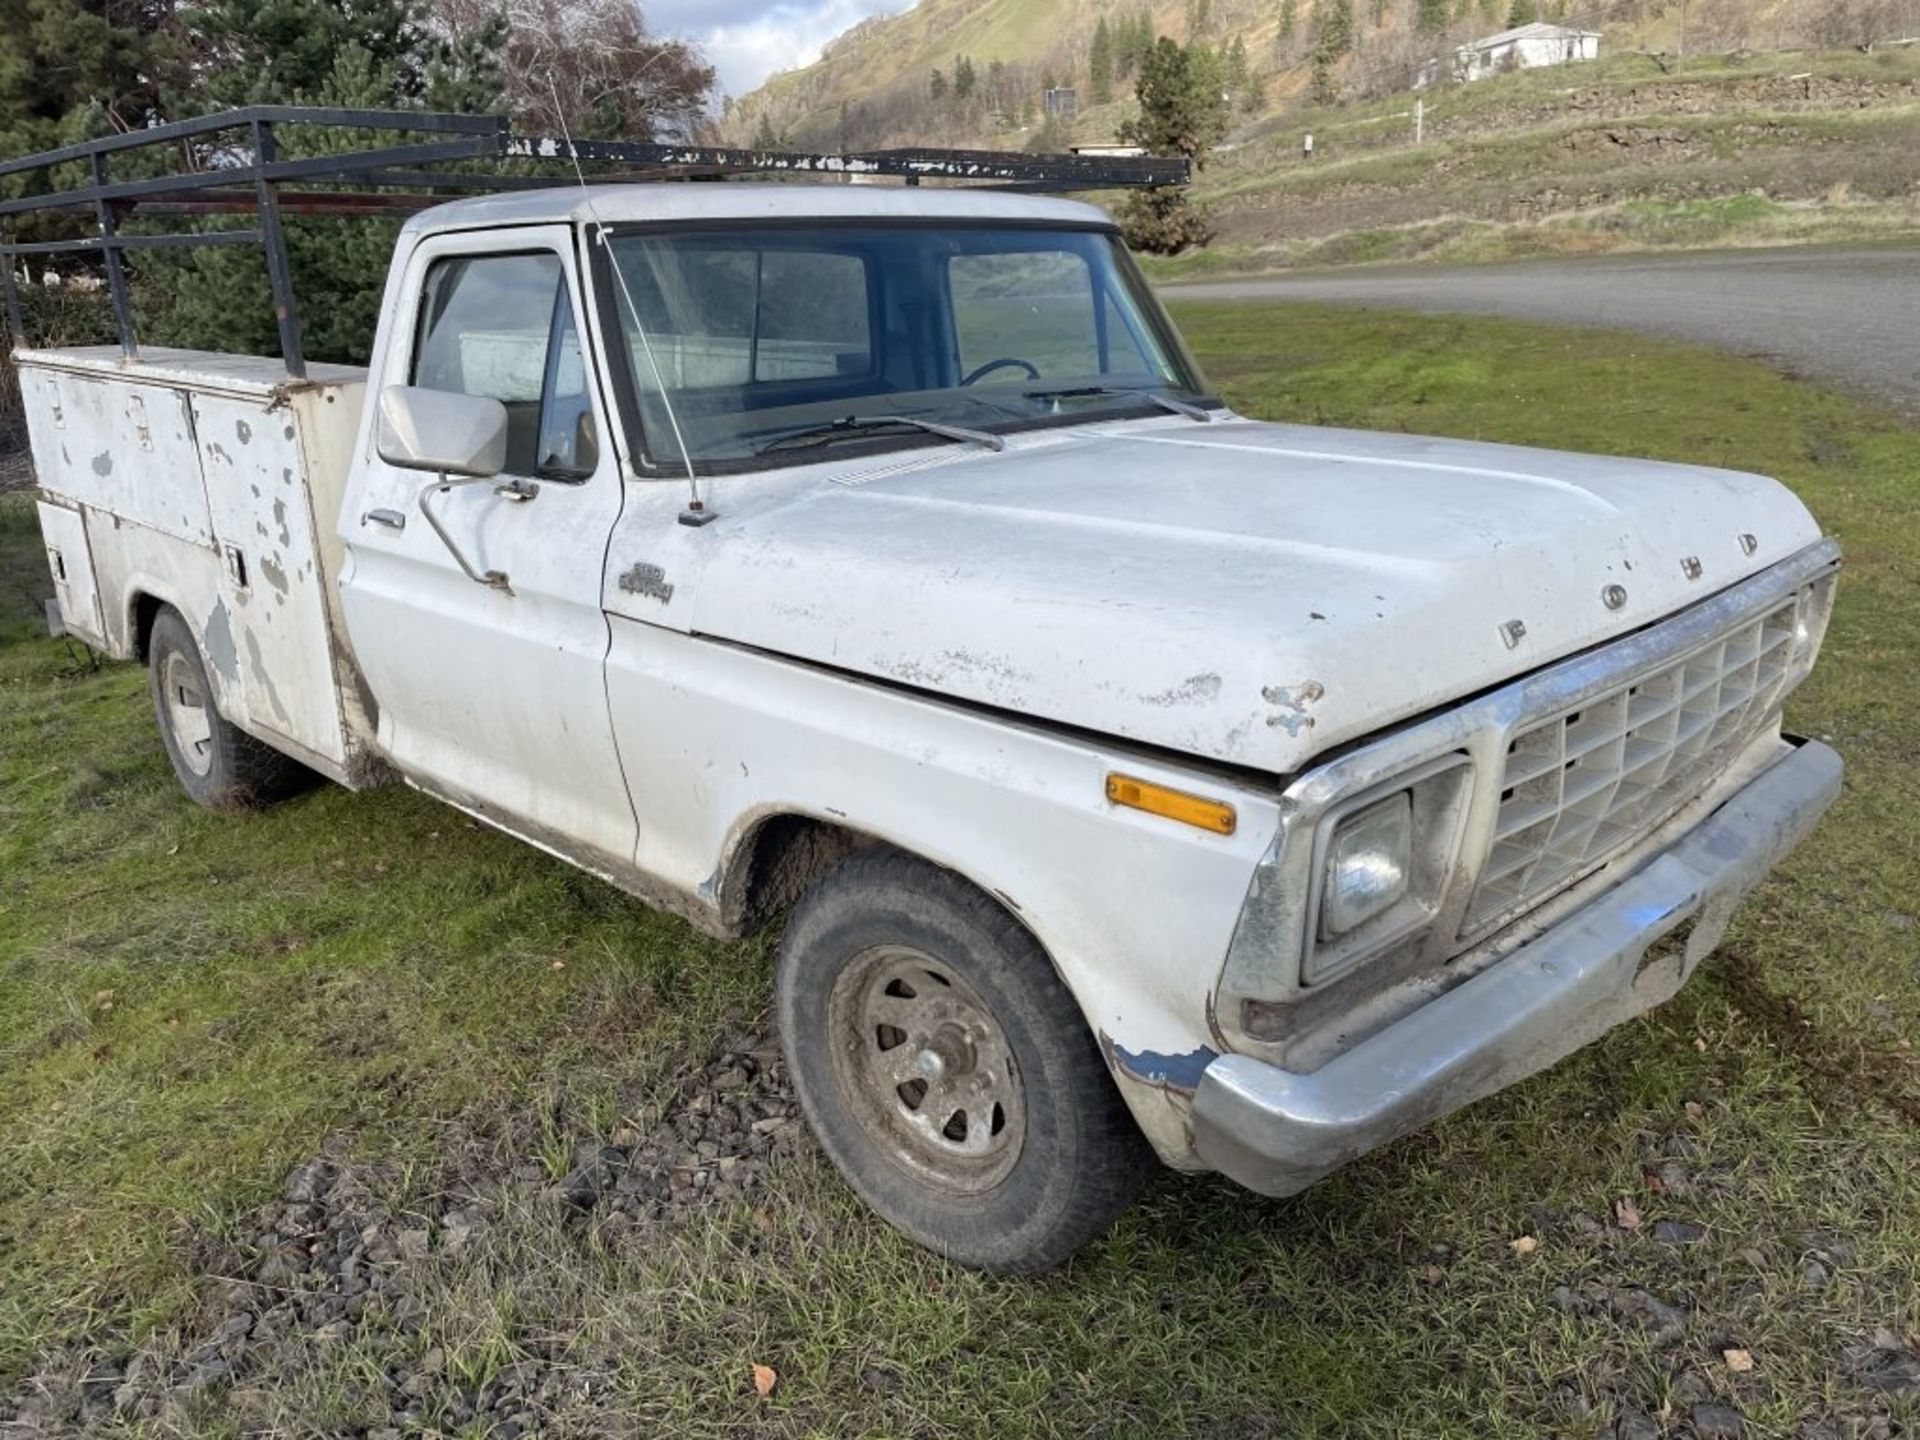 1975 Ford F150 Utility Truck - Image 6 of 11